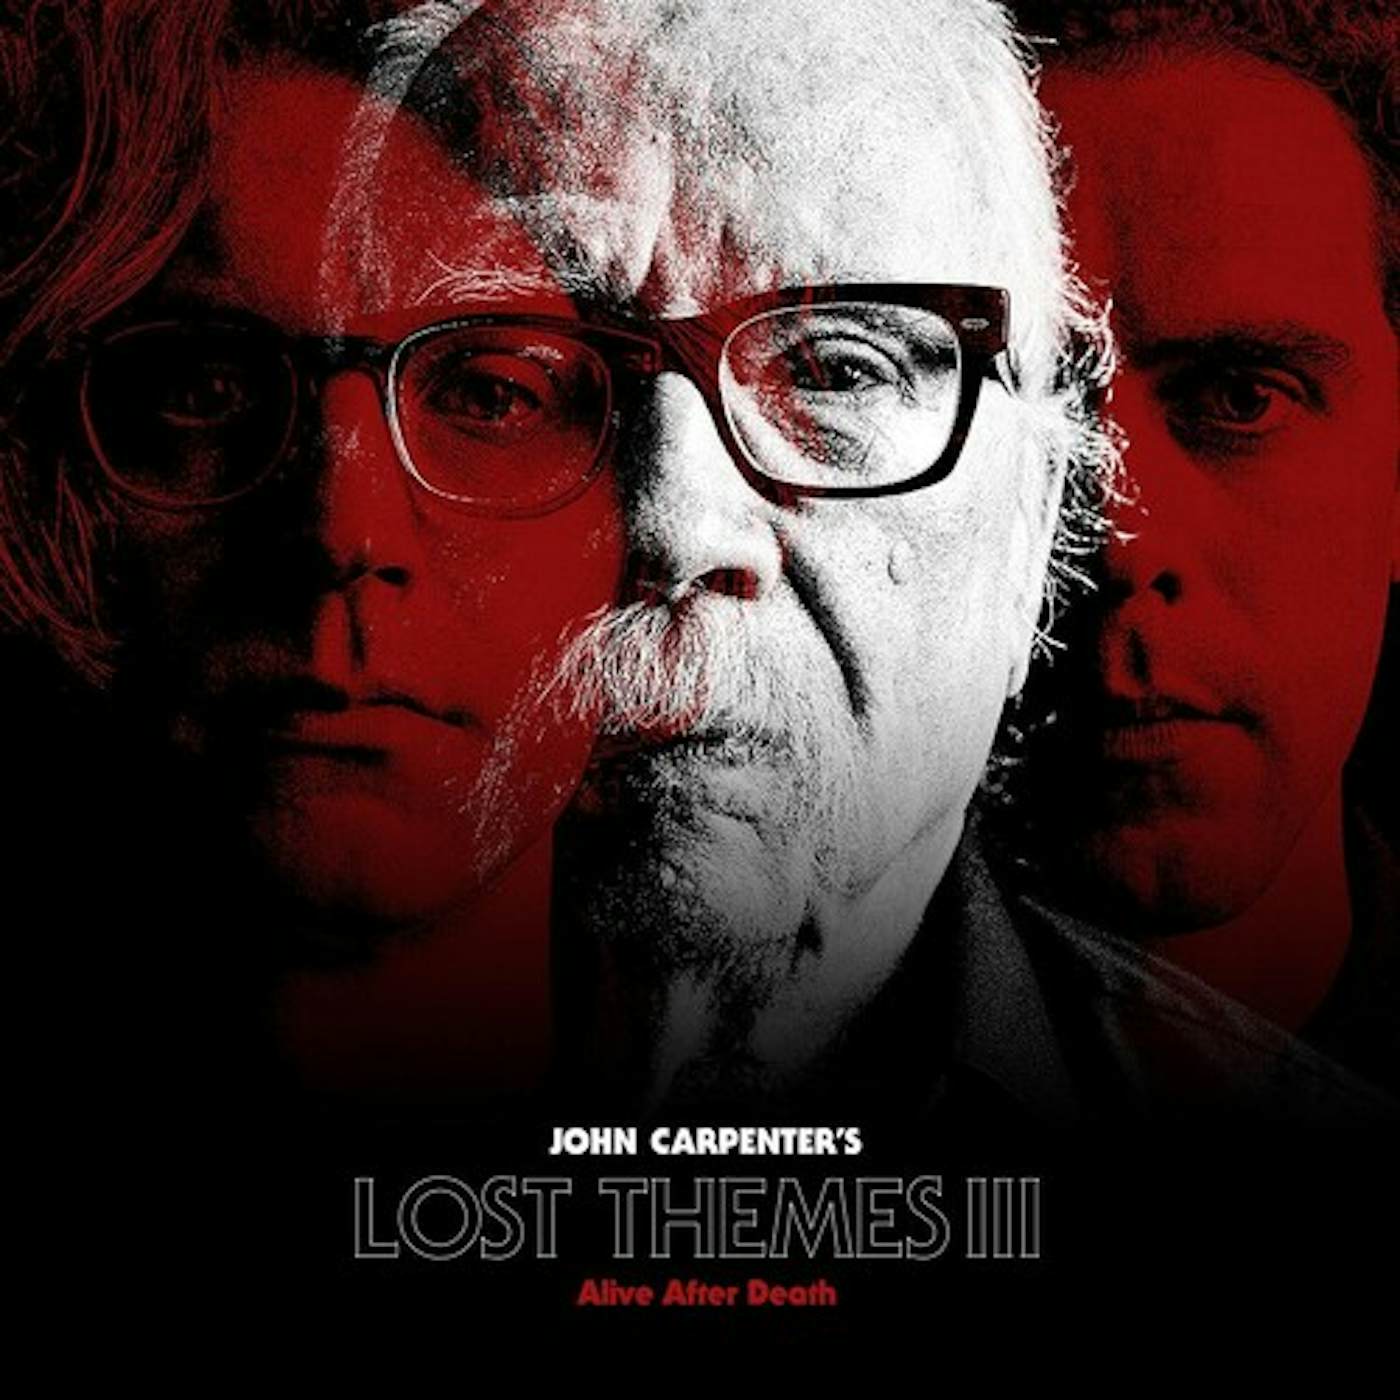 John Carpenter Lost Themes III: Alive After Death Vinyl Record